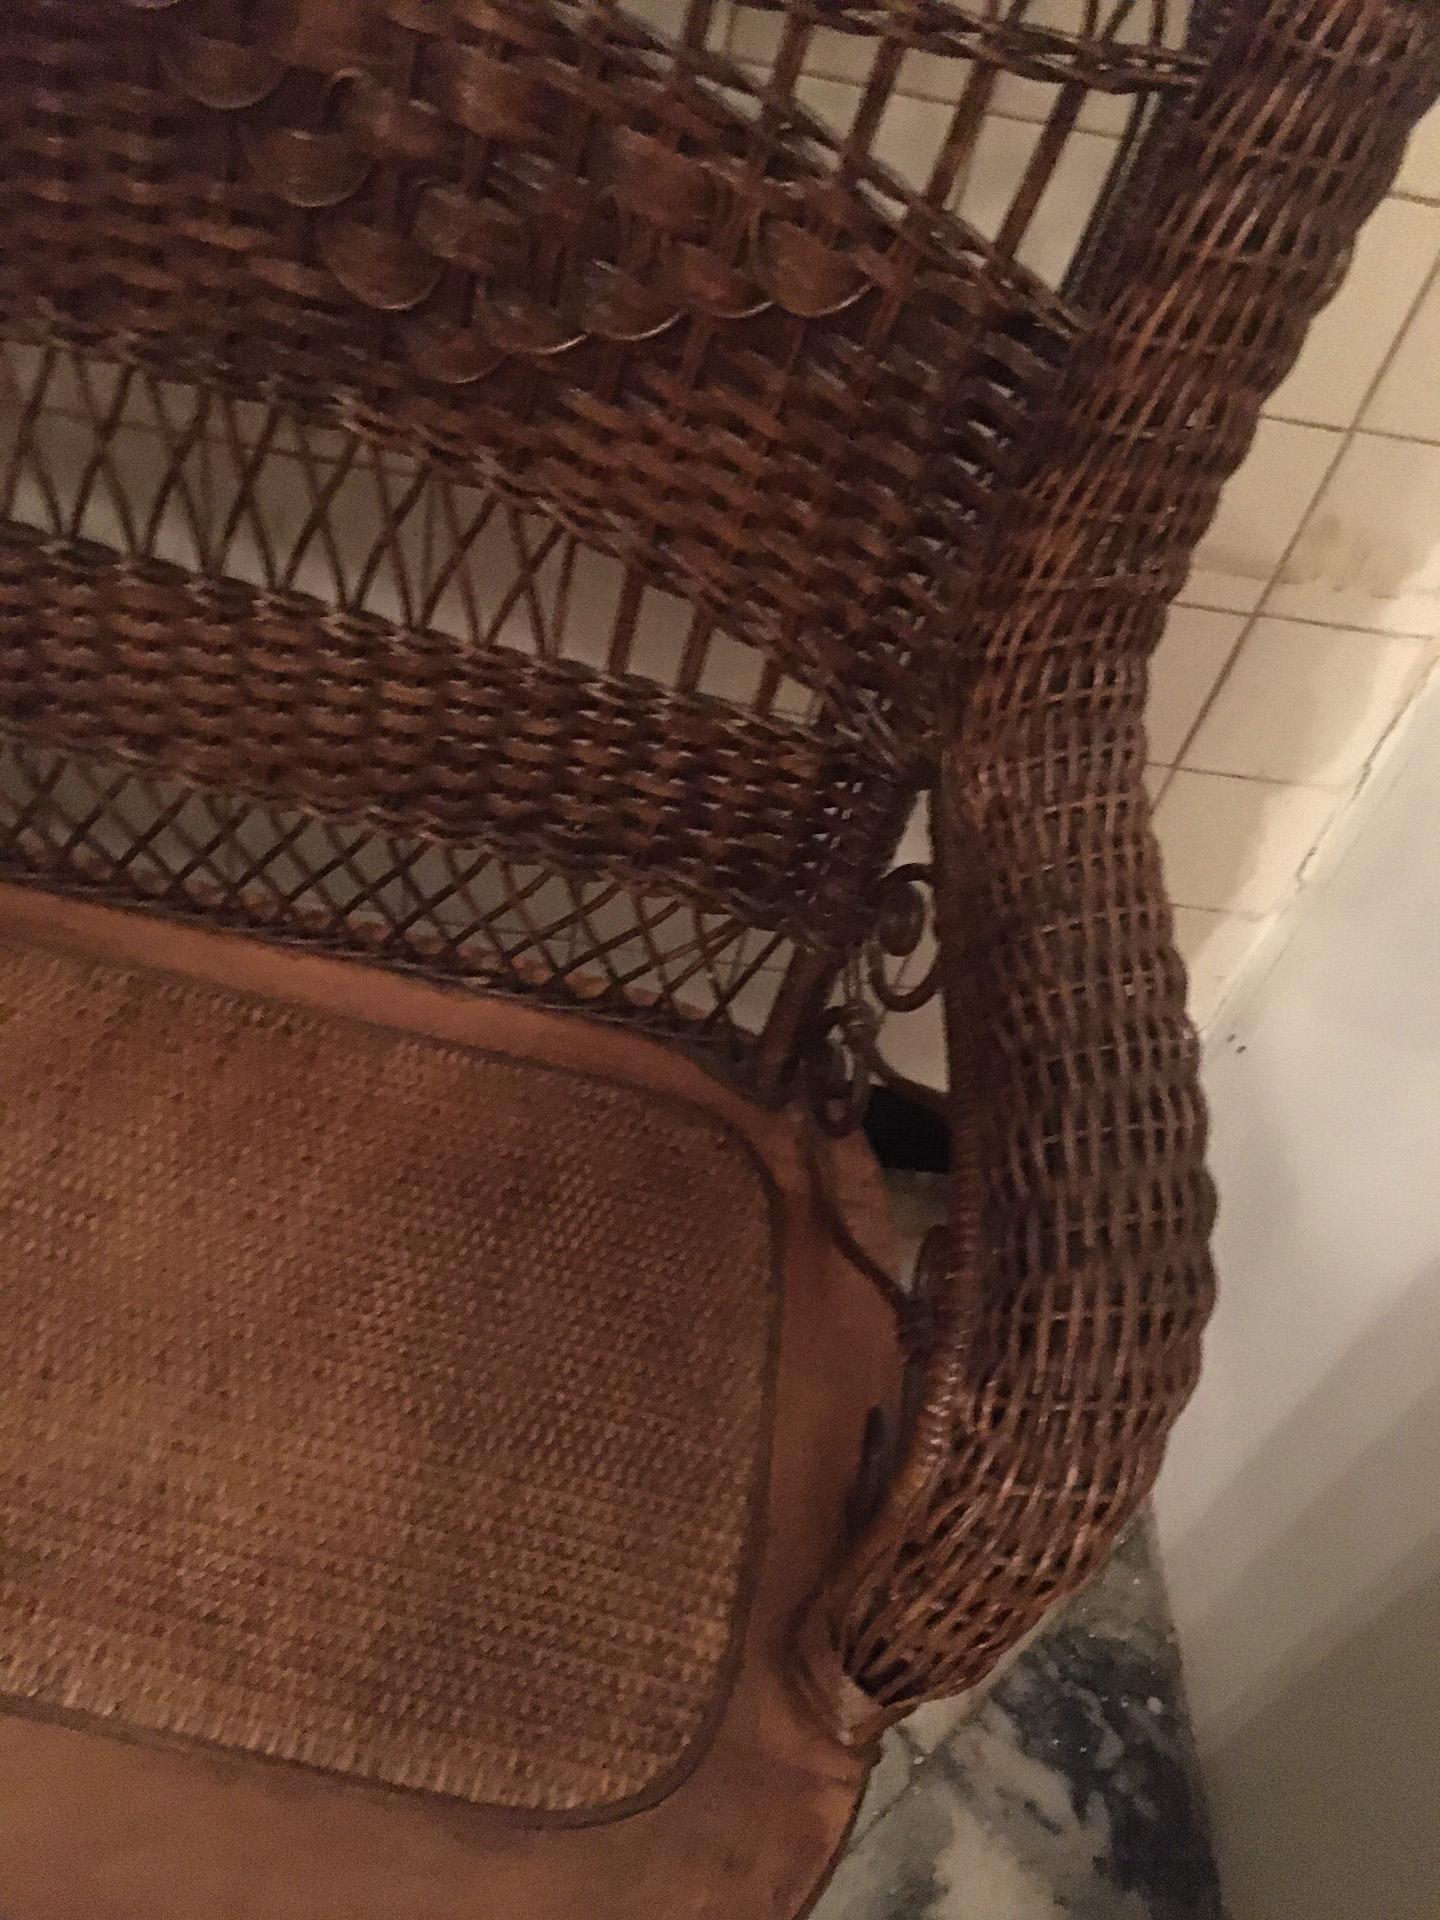 Early 20th Century Antique Wicker Heywood Wakefield Settee with Original Natural Finish circa 1900 For Sale